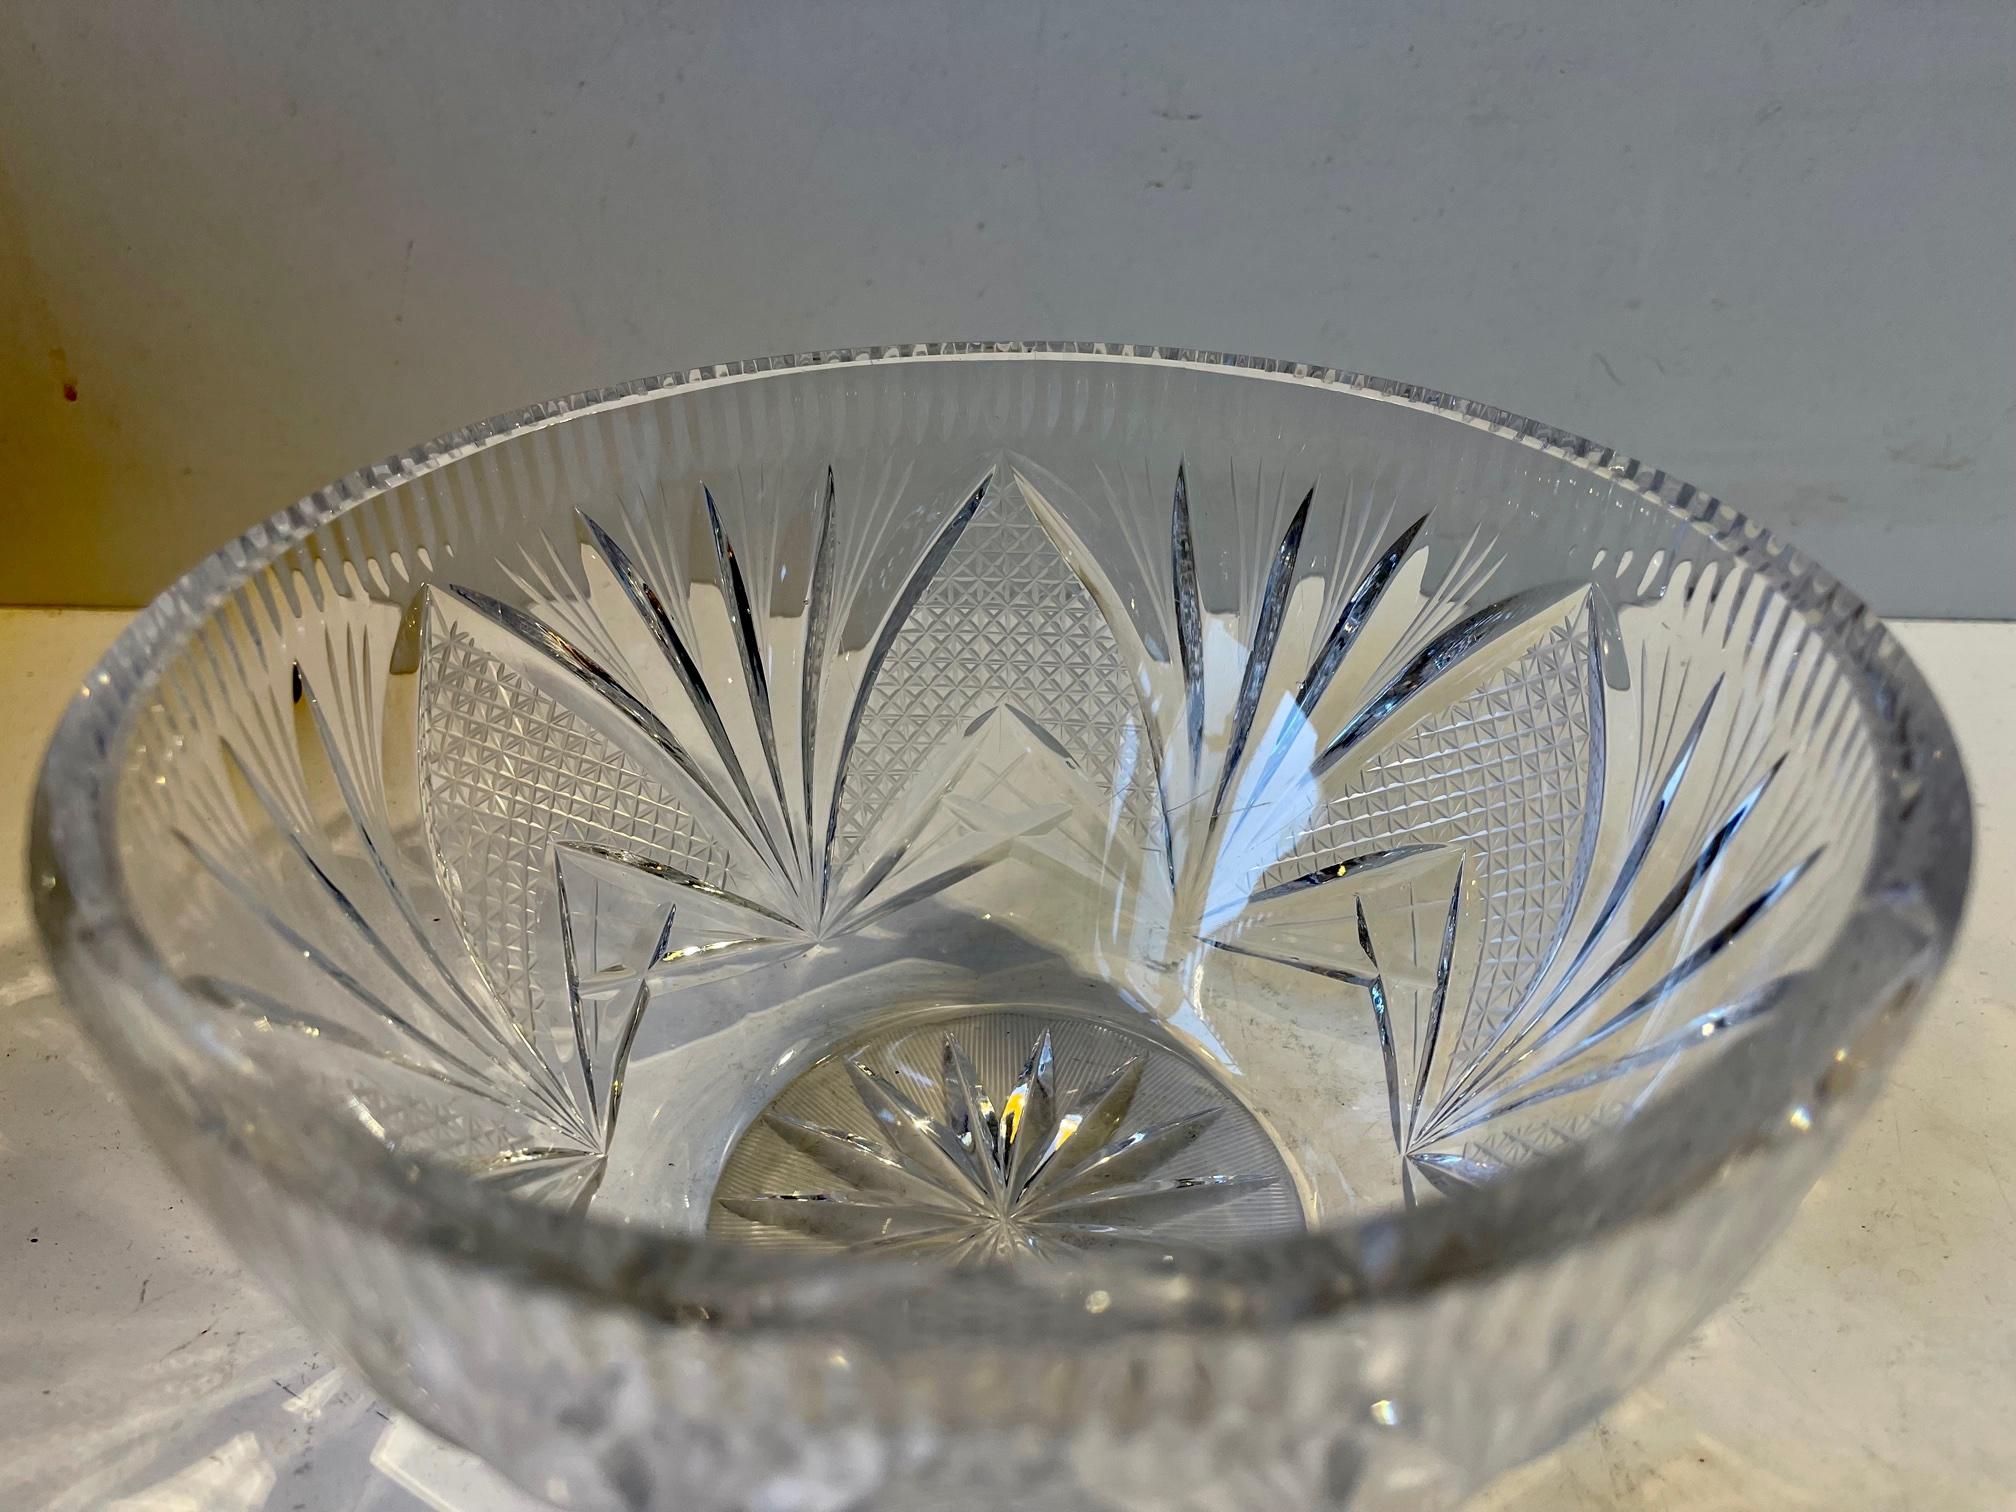 An intricately cut and engraved lead crystal bowl. Decorated with floral impressions. Made in Scandinavia probably by Orrefors circa 1930-40. Measurements: D: 18, H: 9.5 cm.